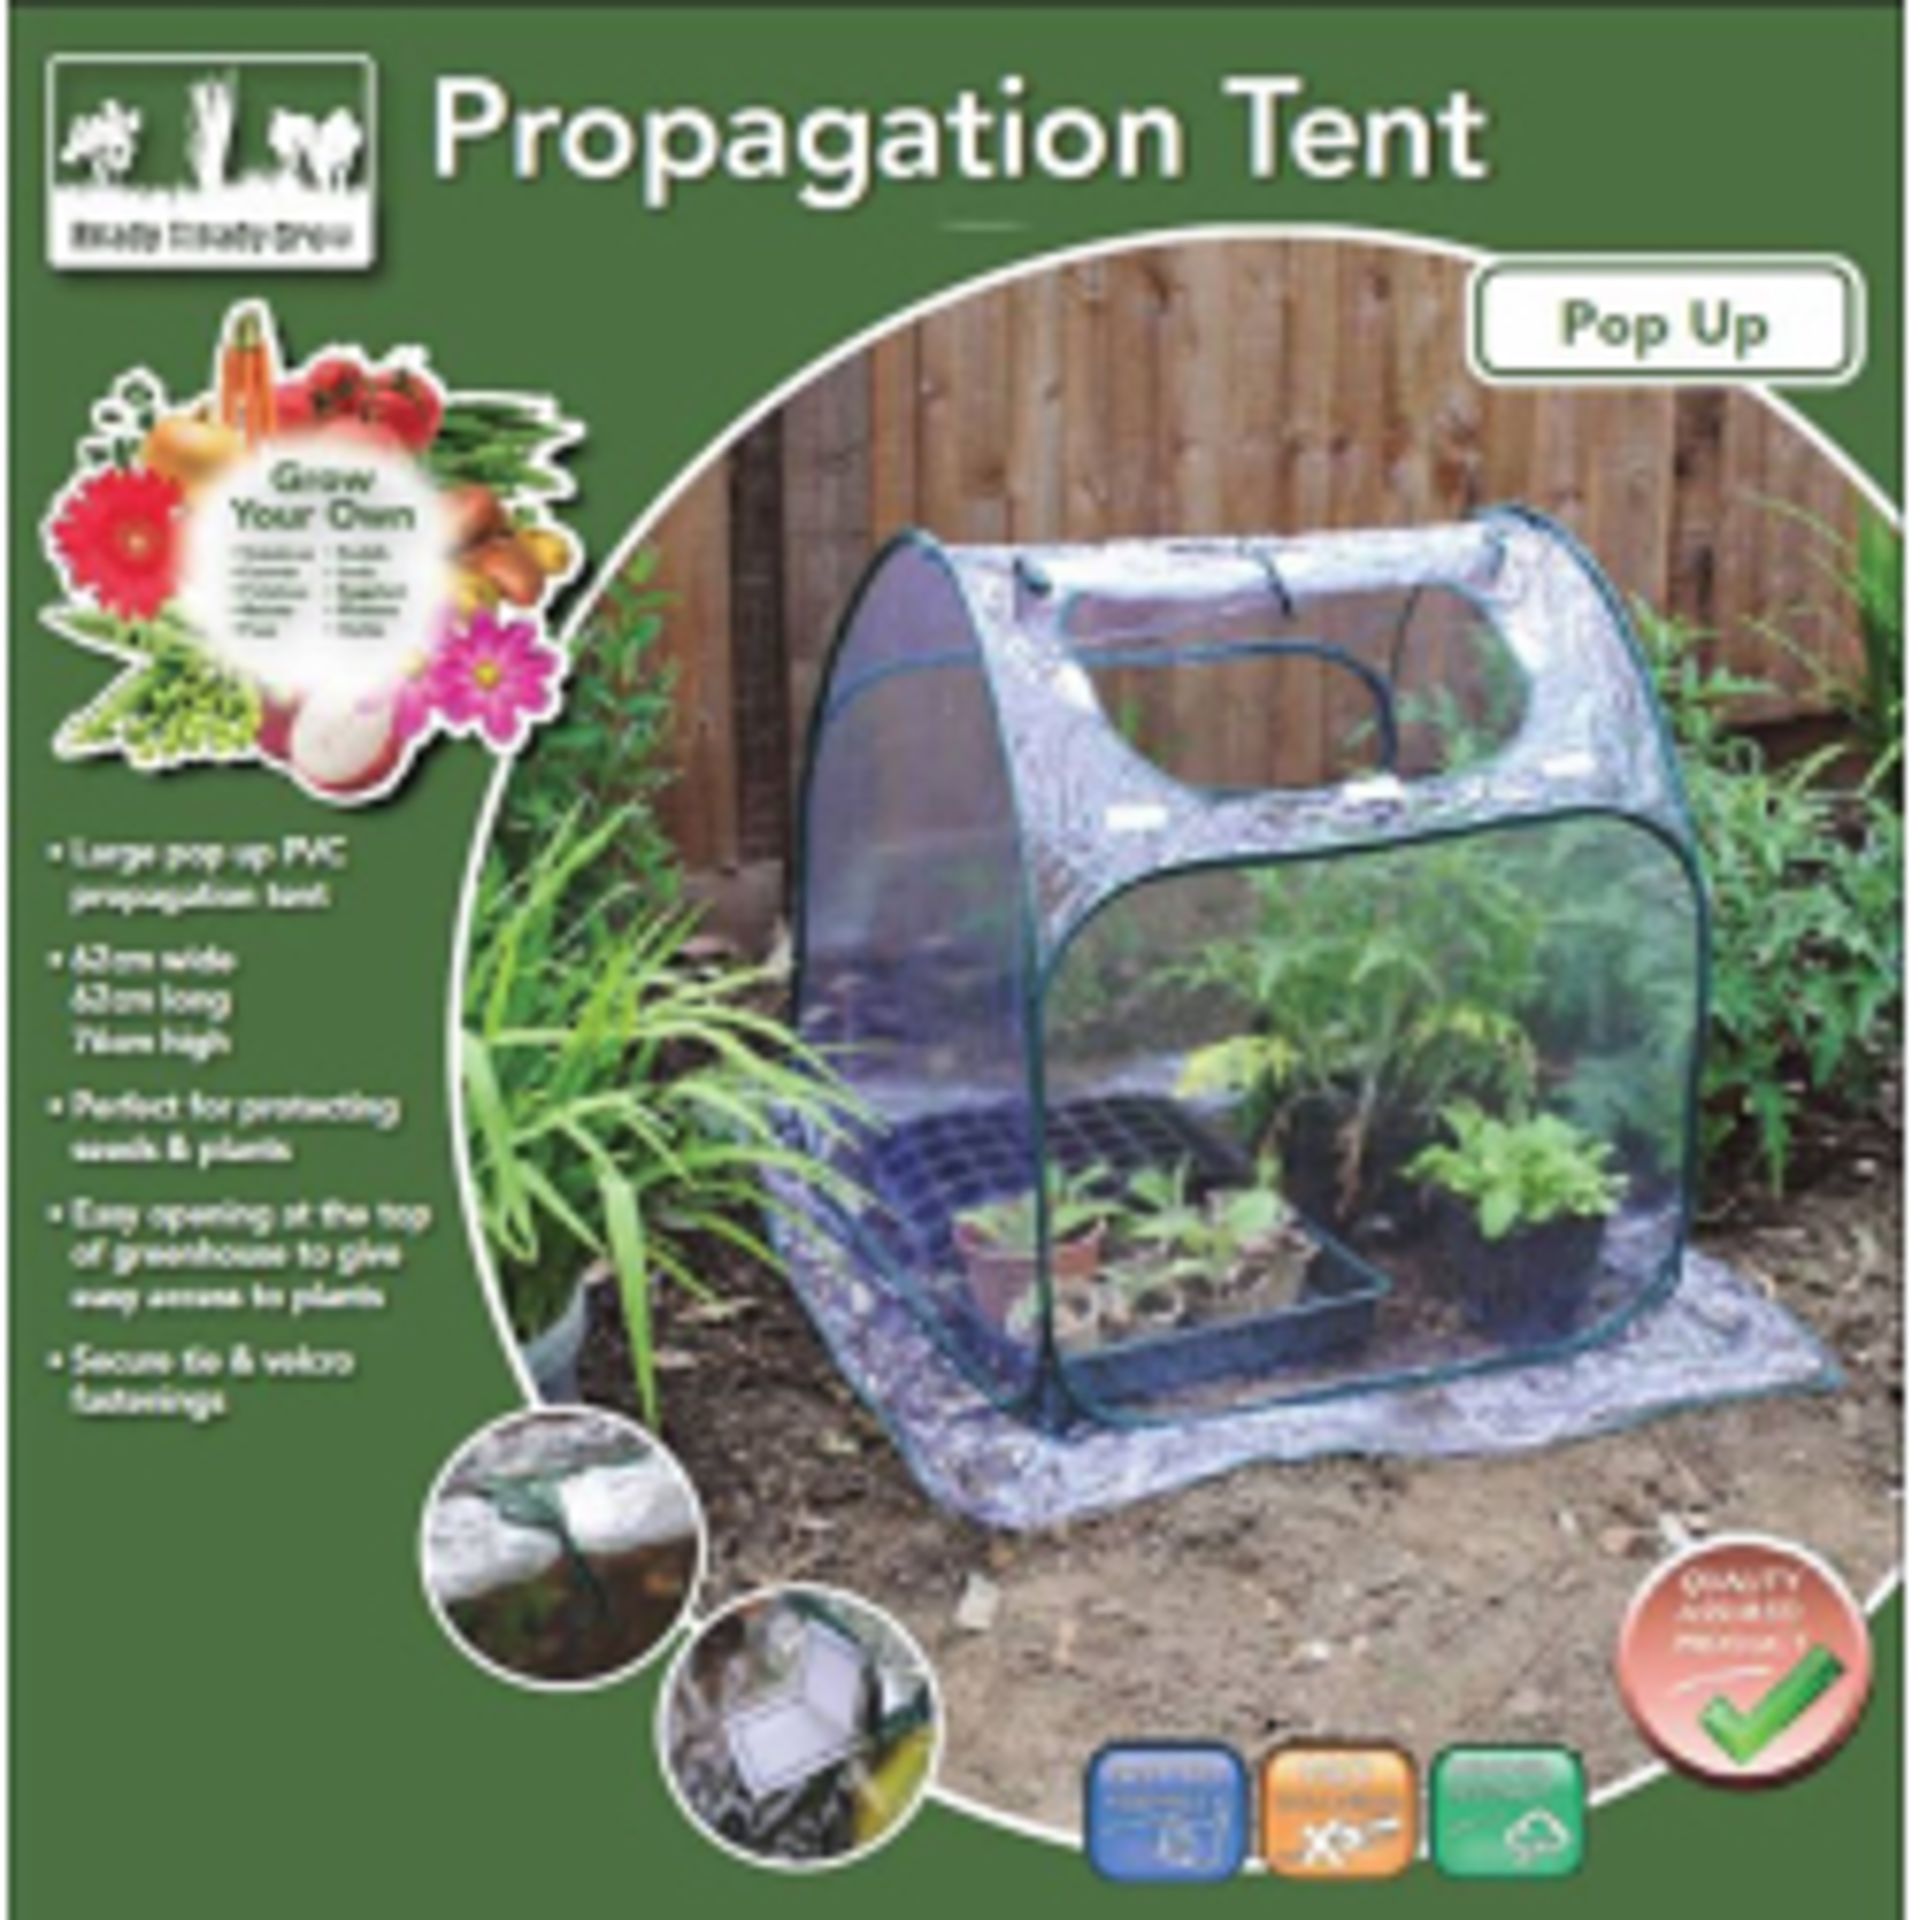 V Pop Up Propagation Dome To Protect Seeds And Plants 62w x 72h x 62d cms X  2  Bid price to be